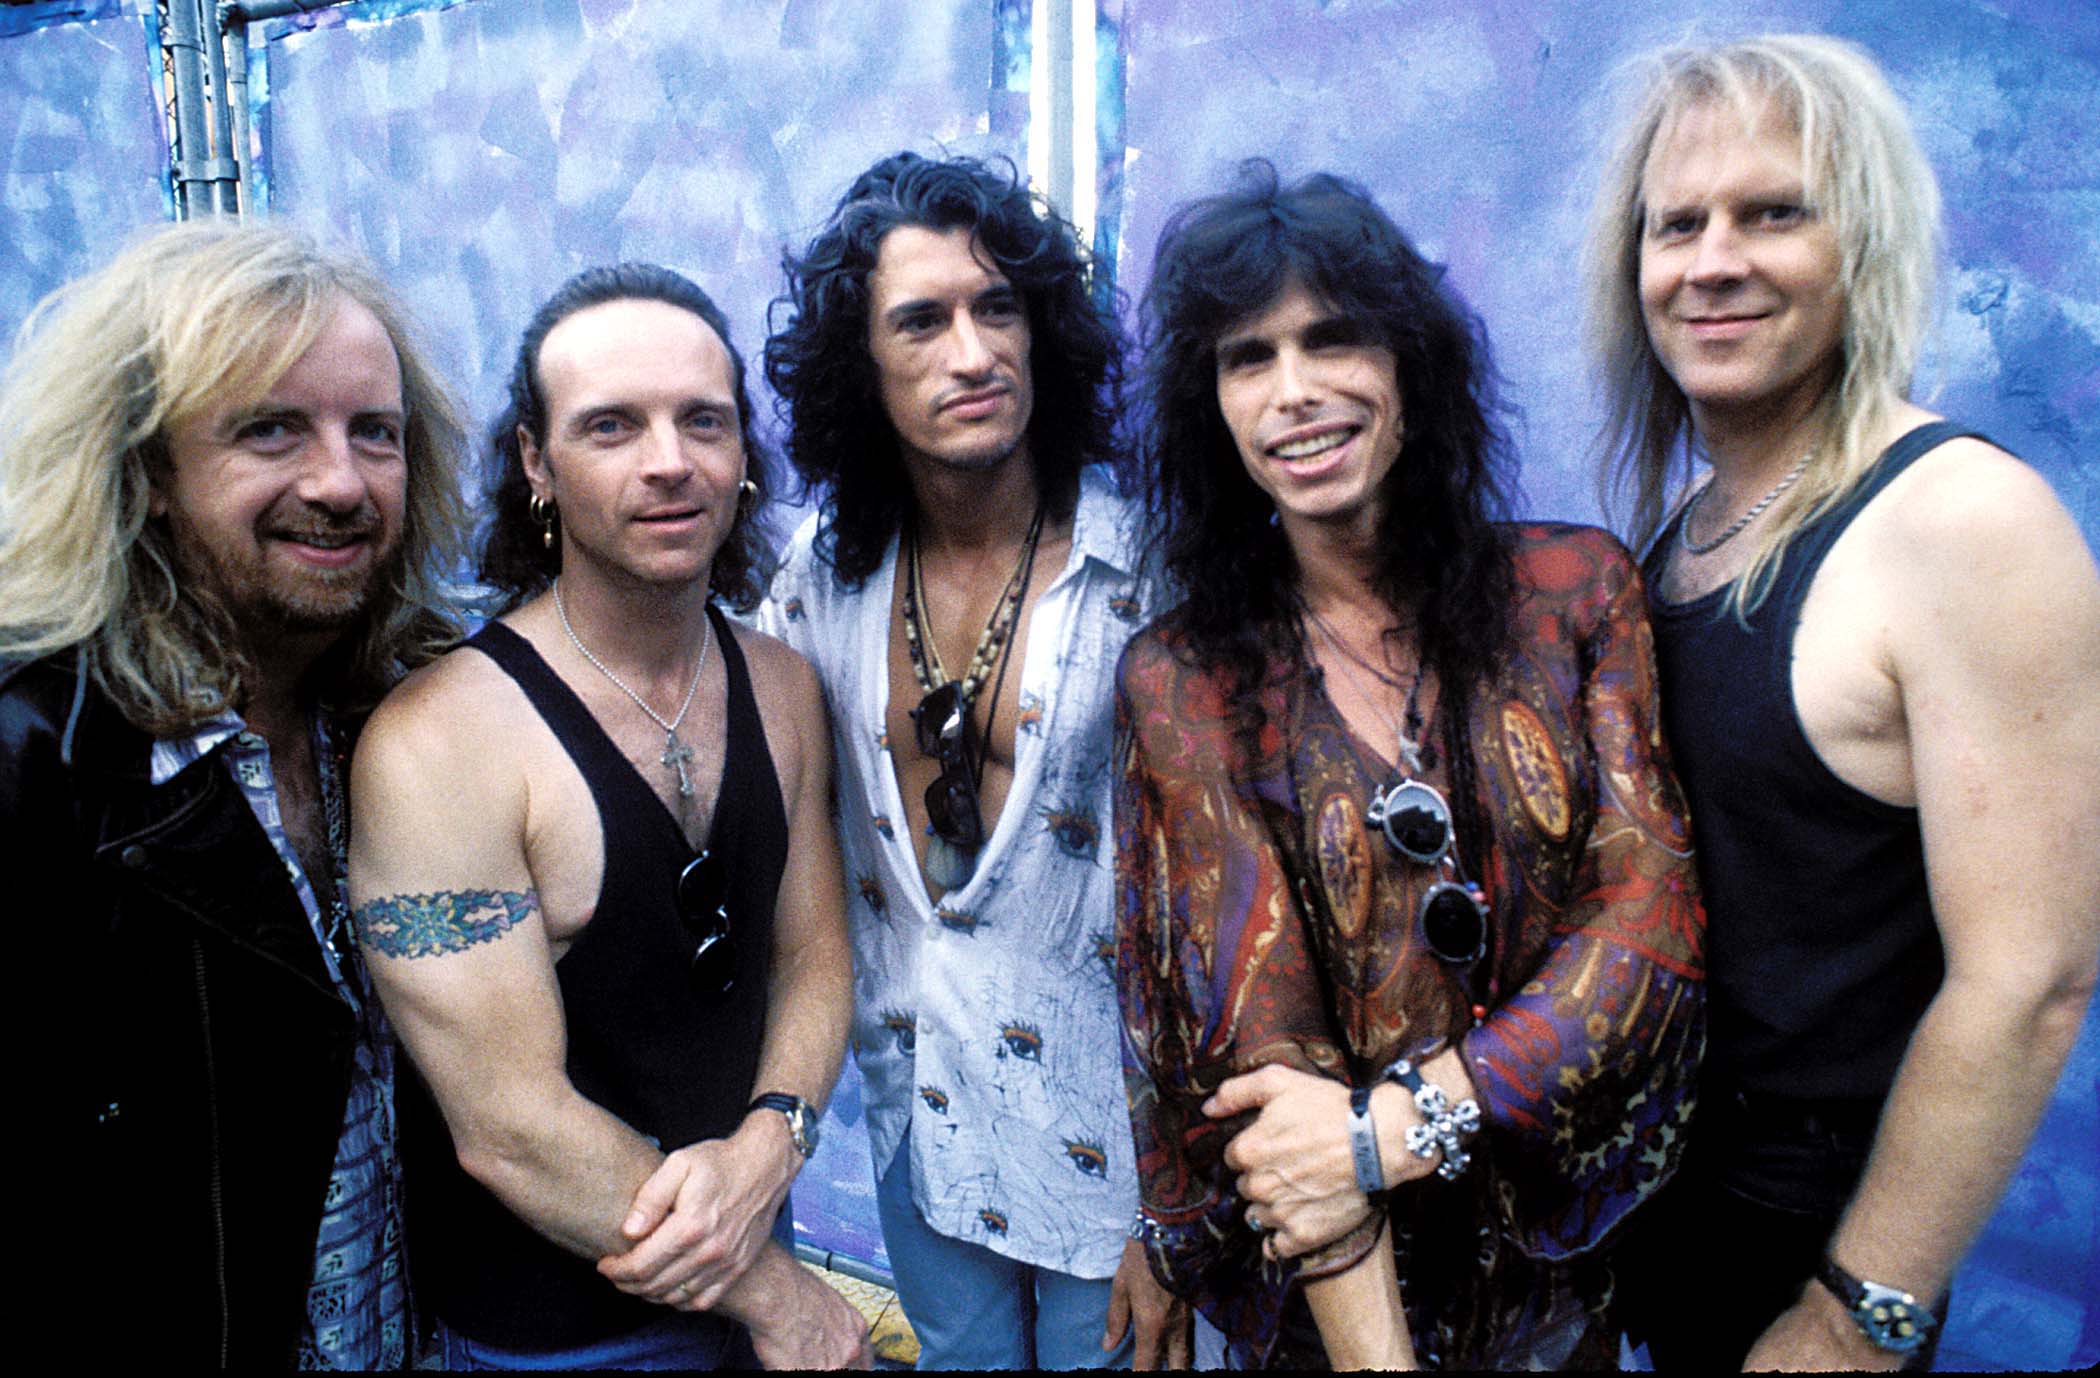 Aerosmith in front of a blue wall